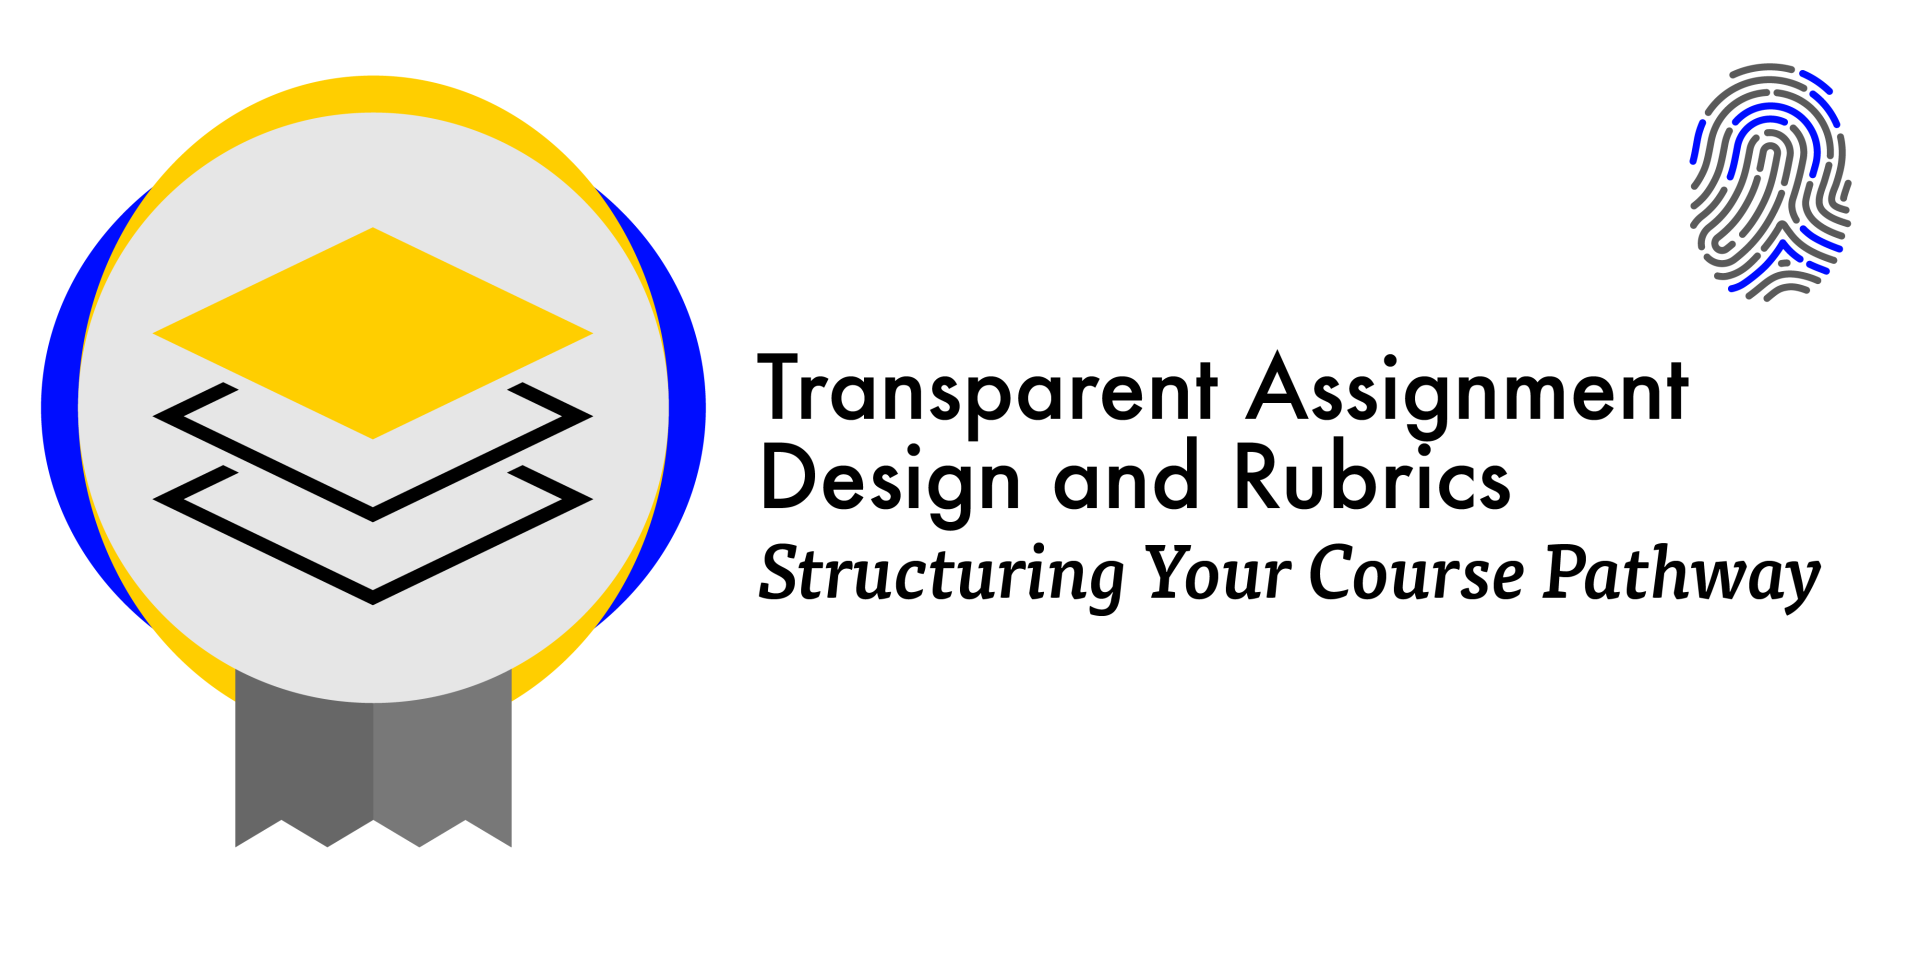 Transparent Assignment Design and Rubrics, Structuring Your Course Pathway